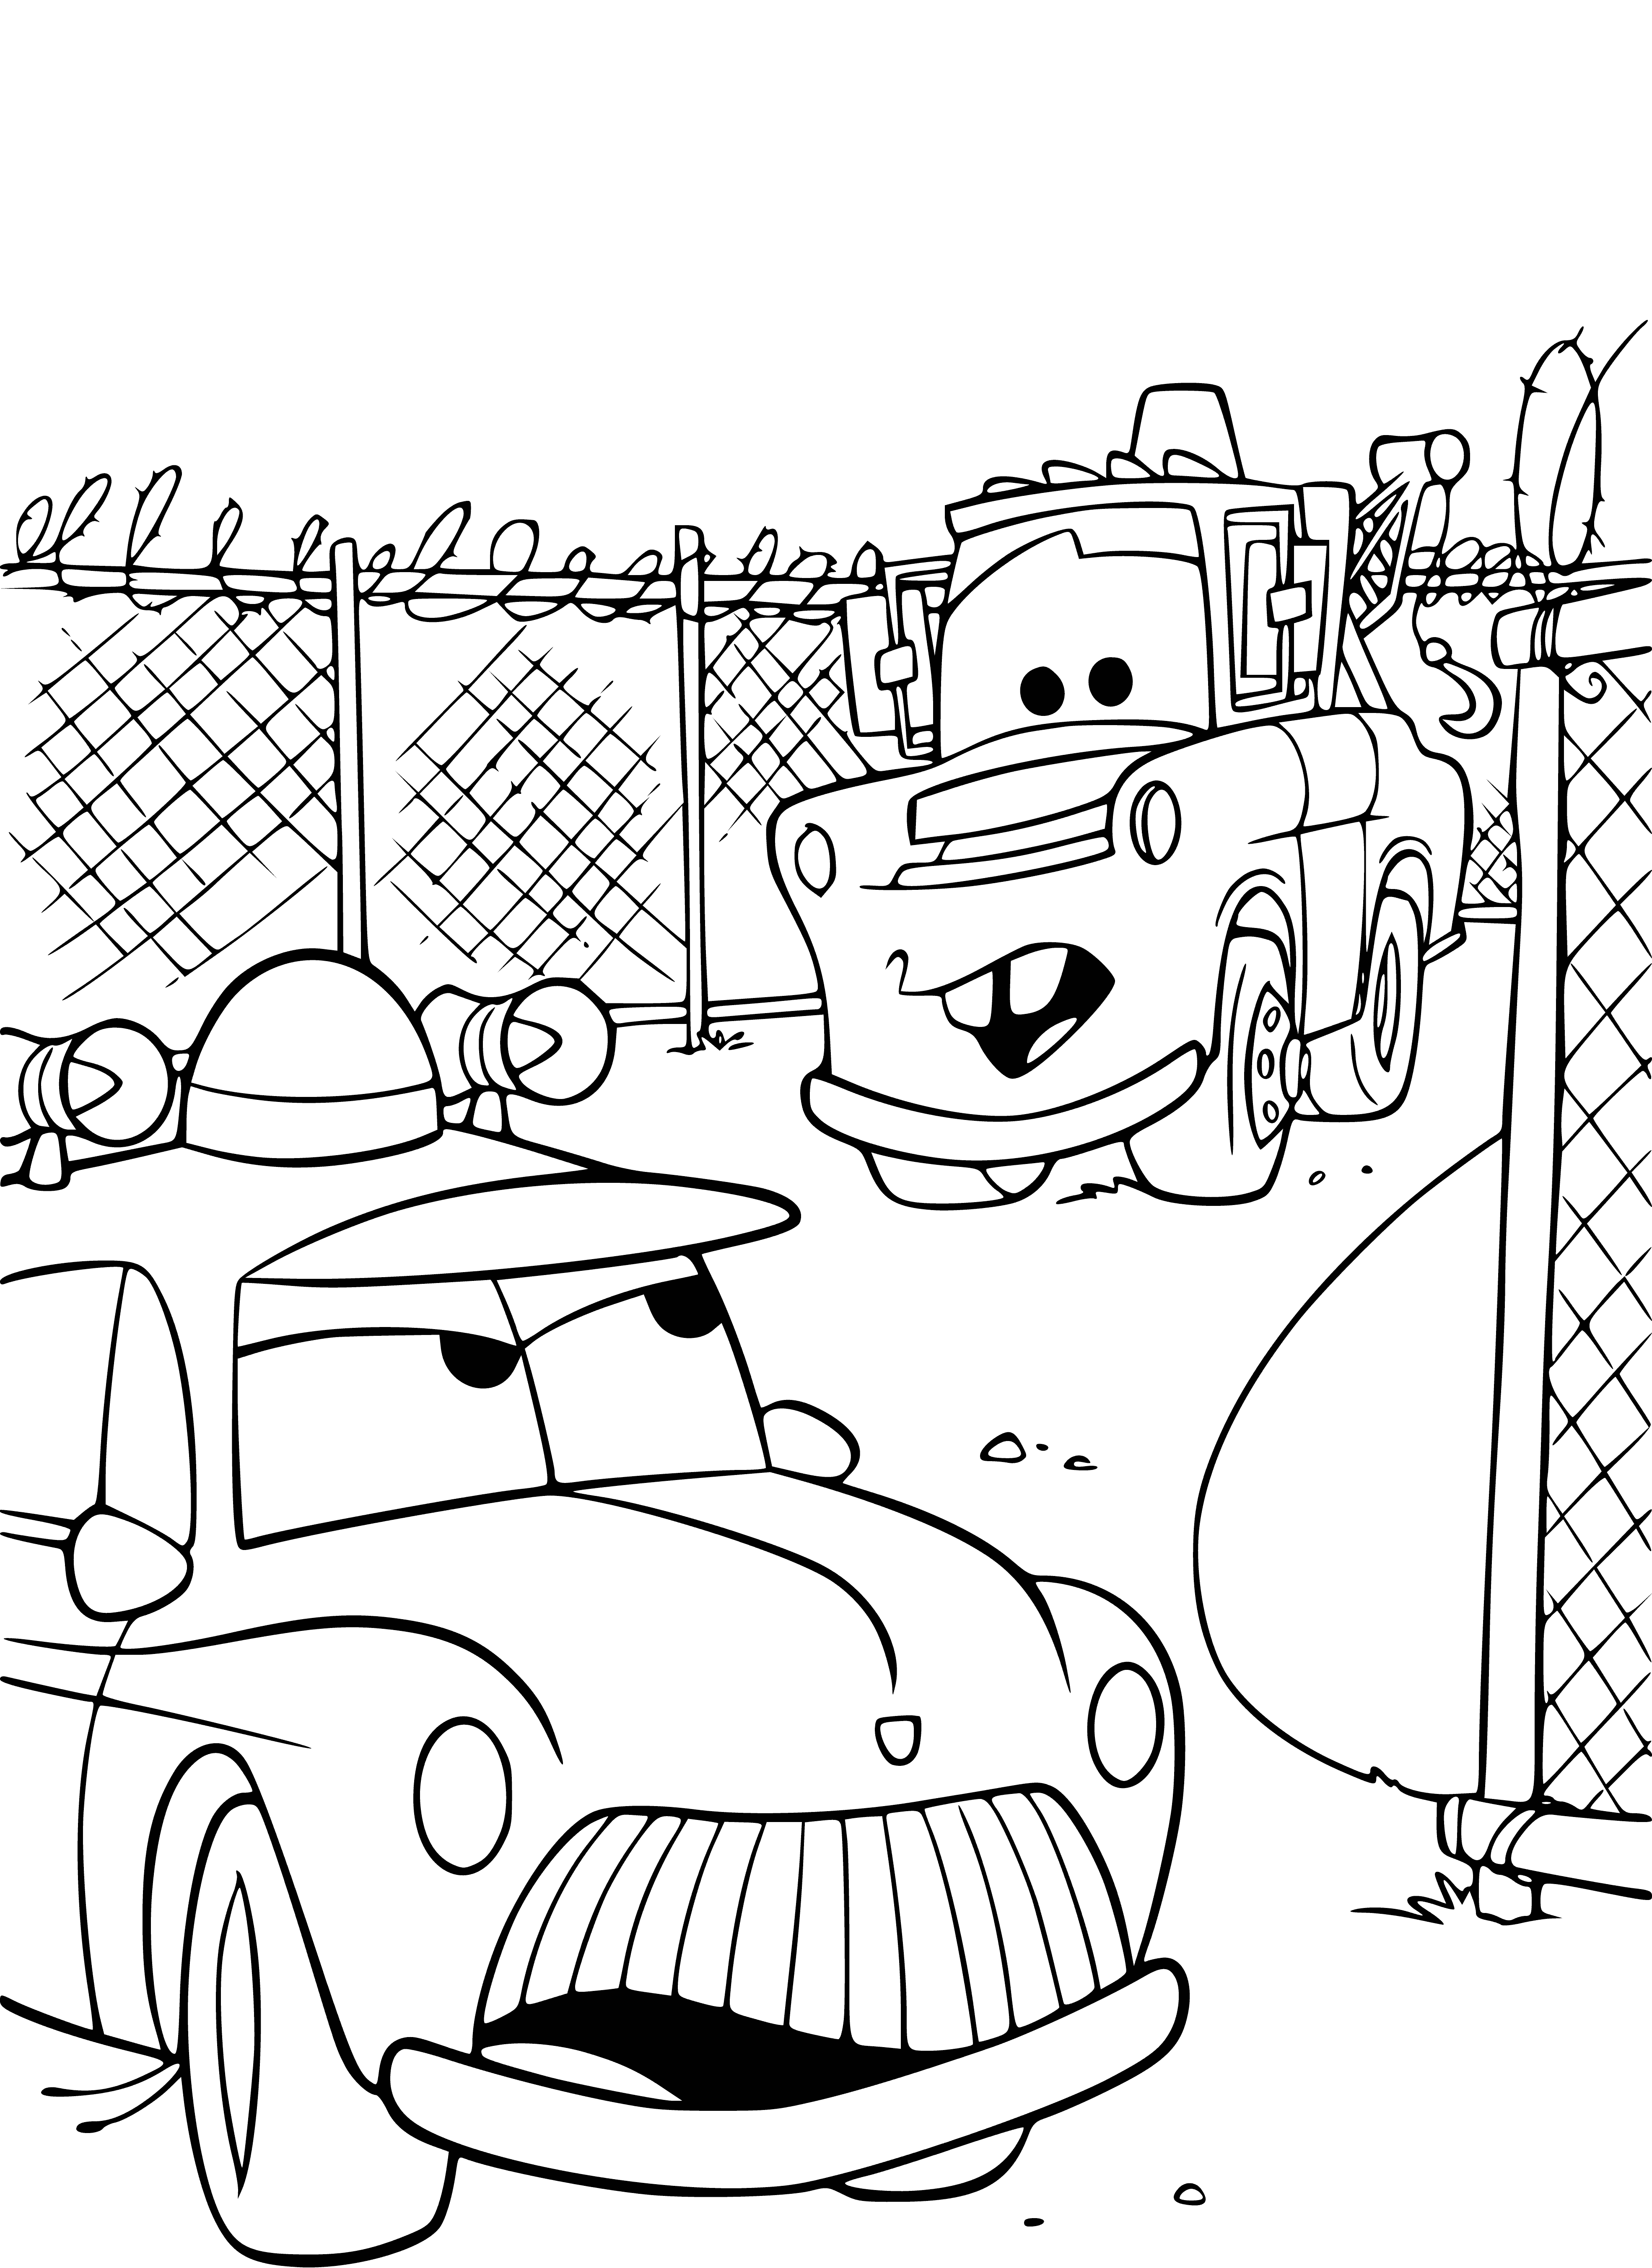 coloring page: Two cars parked side-by-side: sheriff car w/light bar & spotlights, maitre d' car w/VIP Parking sign.